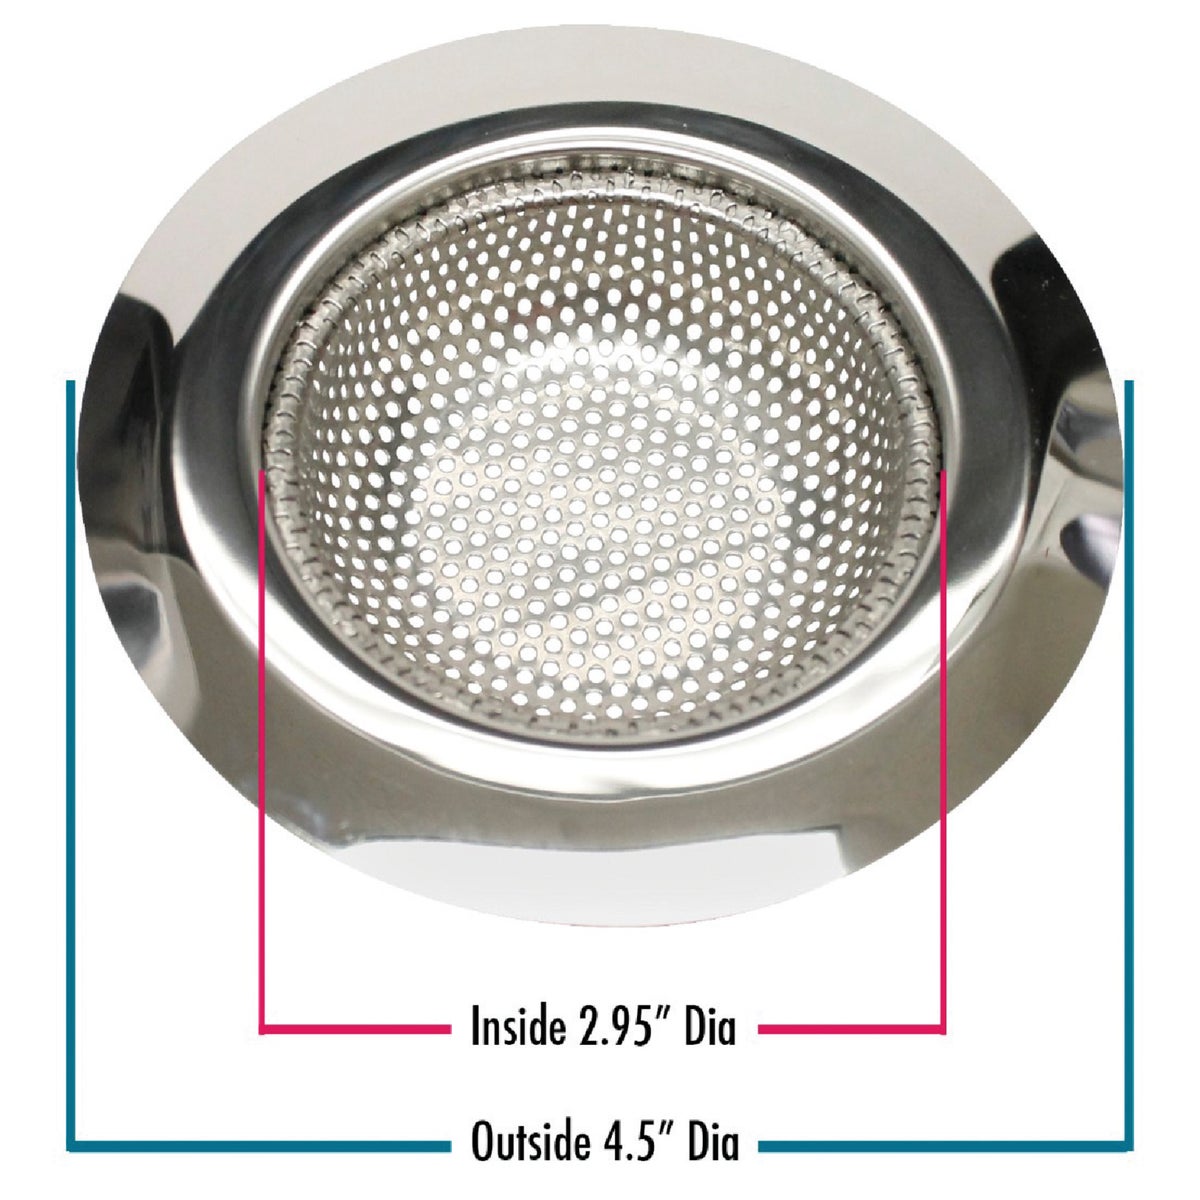 Item 448739, Features 2 millimeter holes drilled into the strainer to prevent clogging 